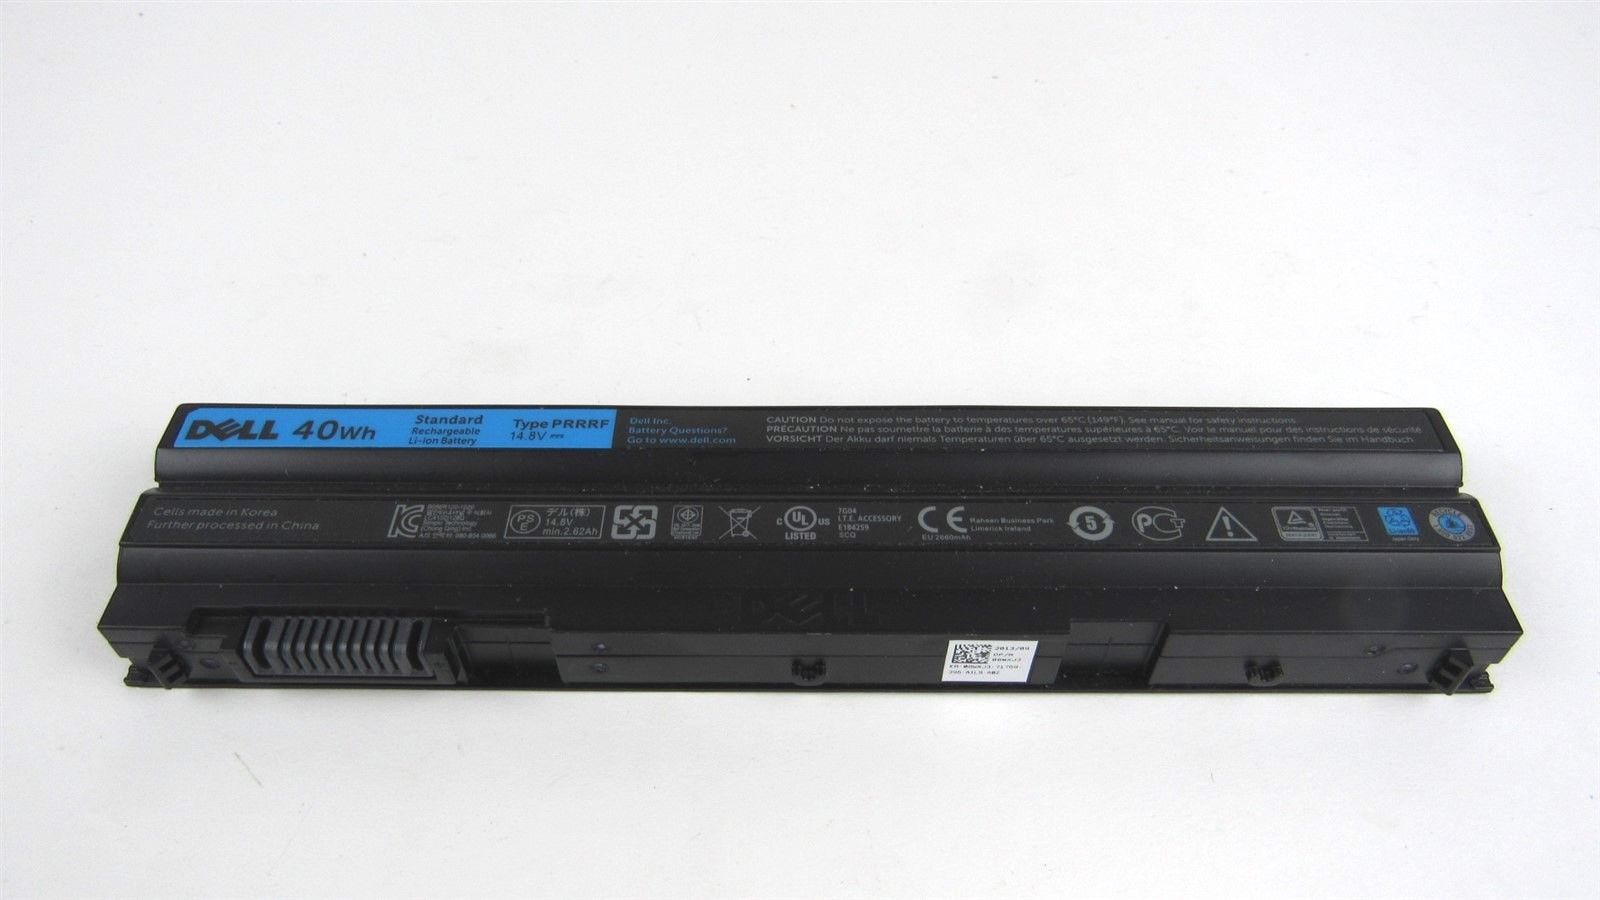 Dell 451-11976 E-CWVXW Battery : Primary 4-cell 40W/HR ExpressCharge PRRRF 8WXJ3